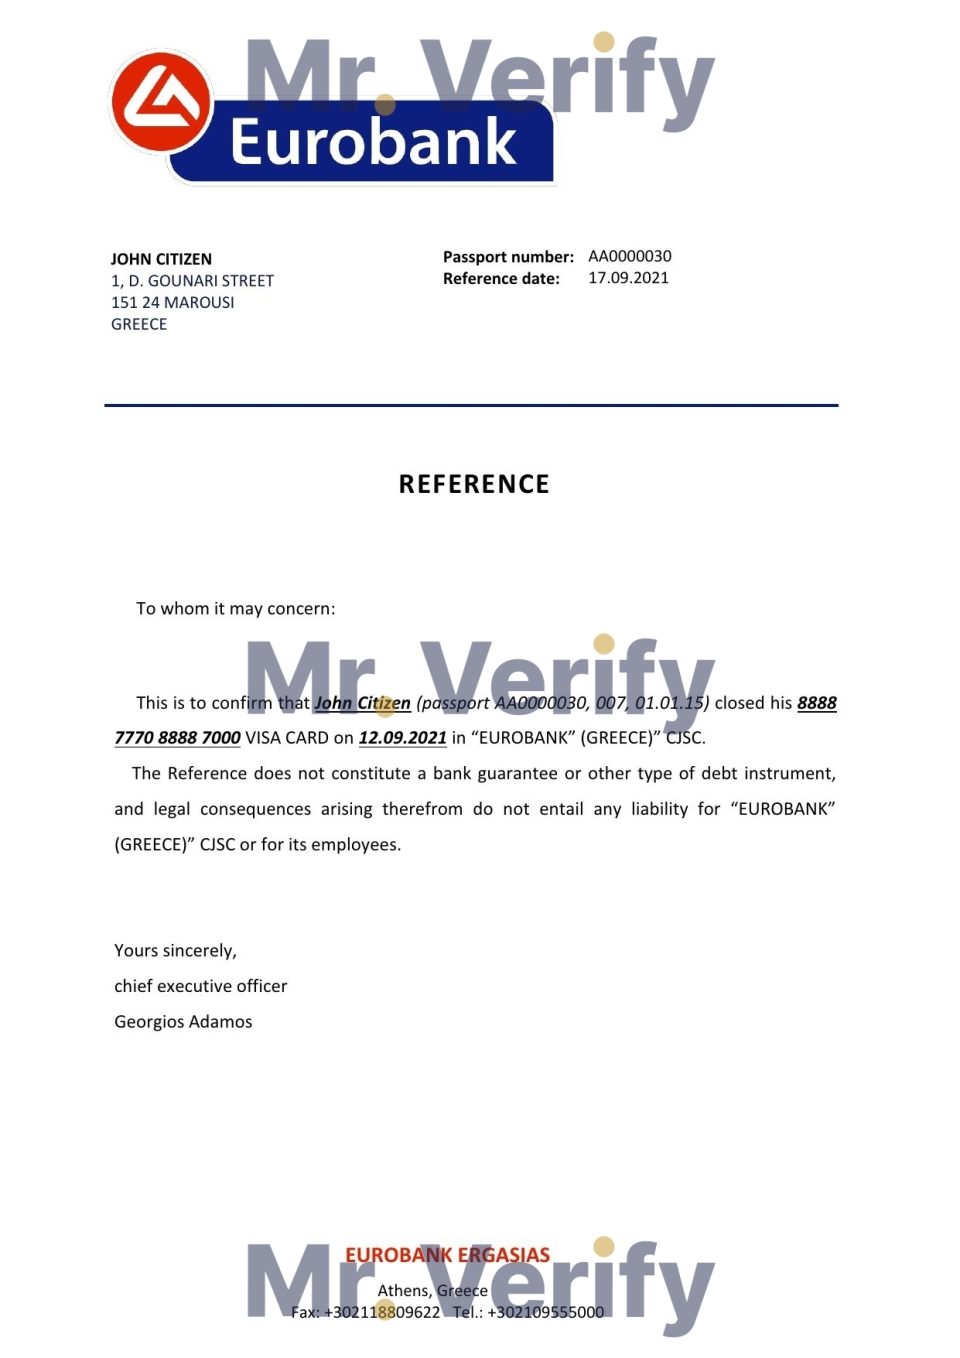 Download Greece Eurobank Bank Reference Letter Templates | Editable Word